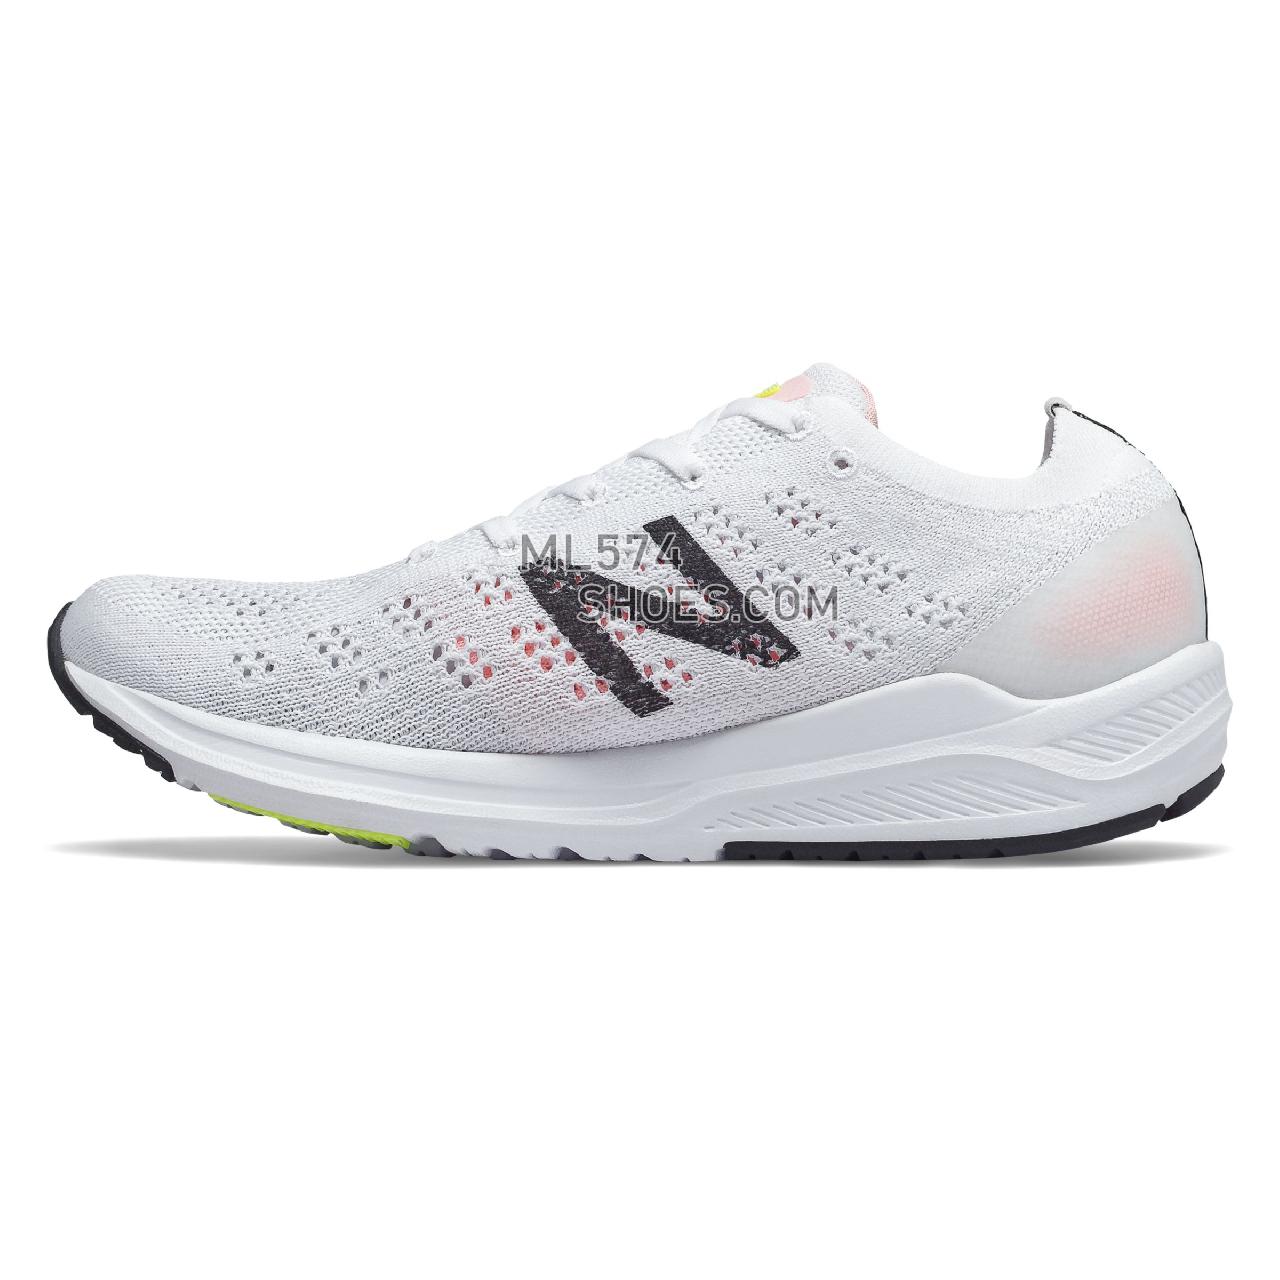 New Balance 890v7 - Women's Neutral Running - White with Guava Glo and Bleached Lime Glo - W890WO7